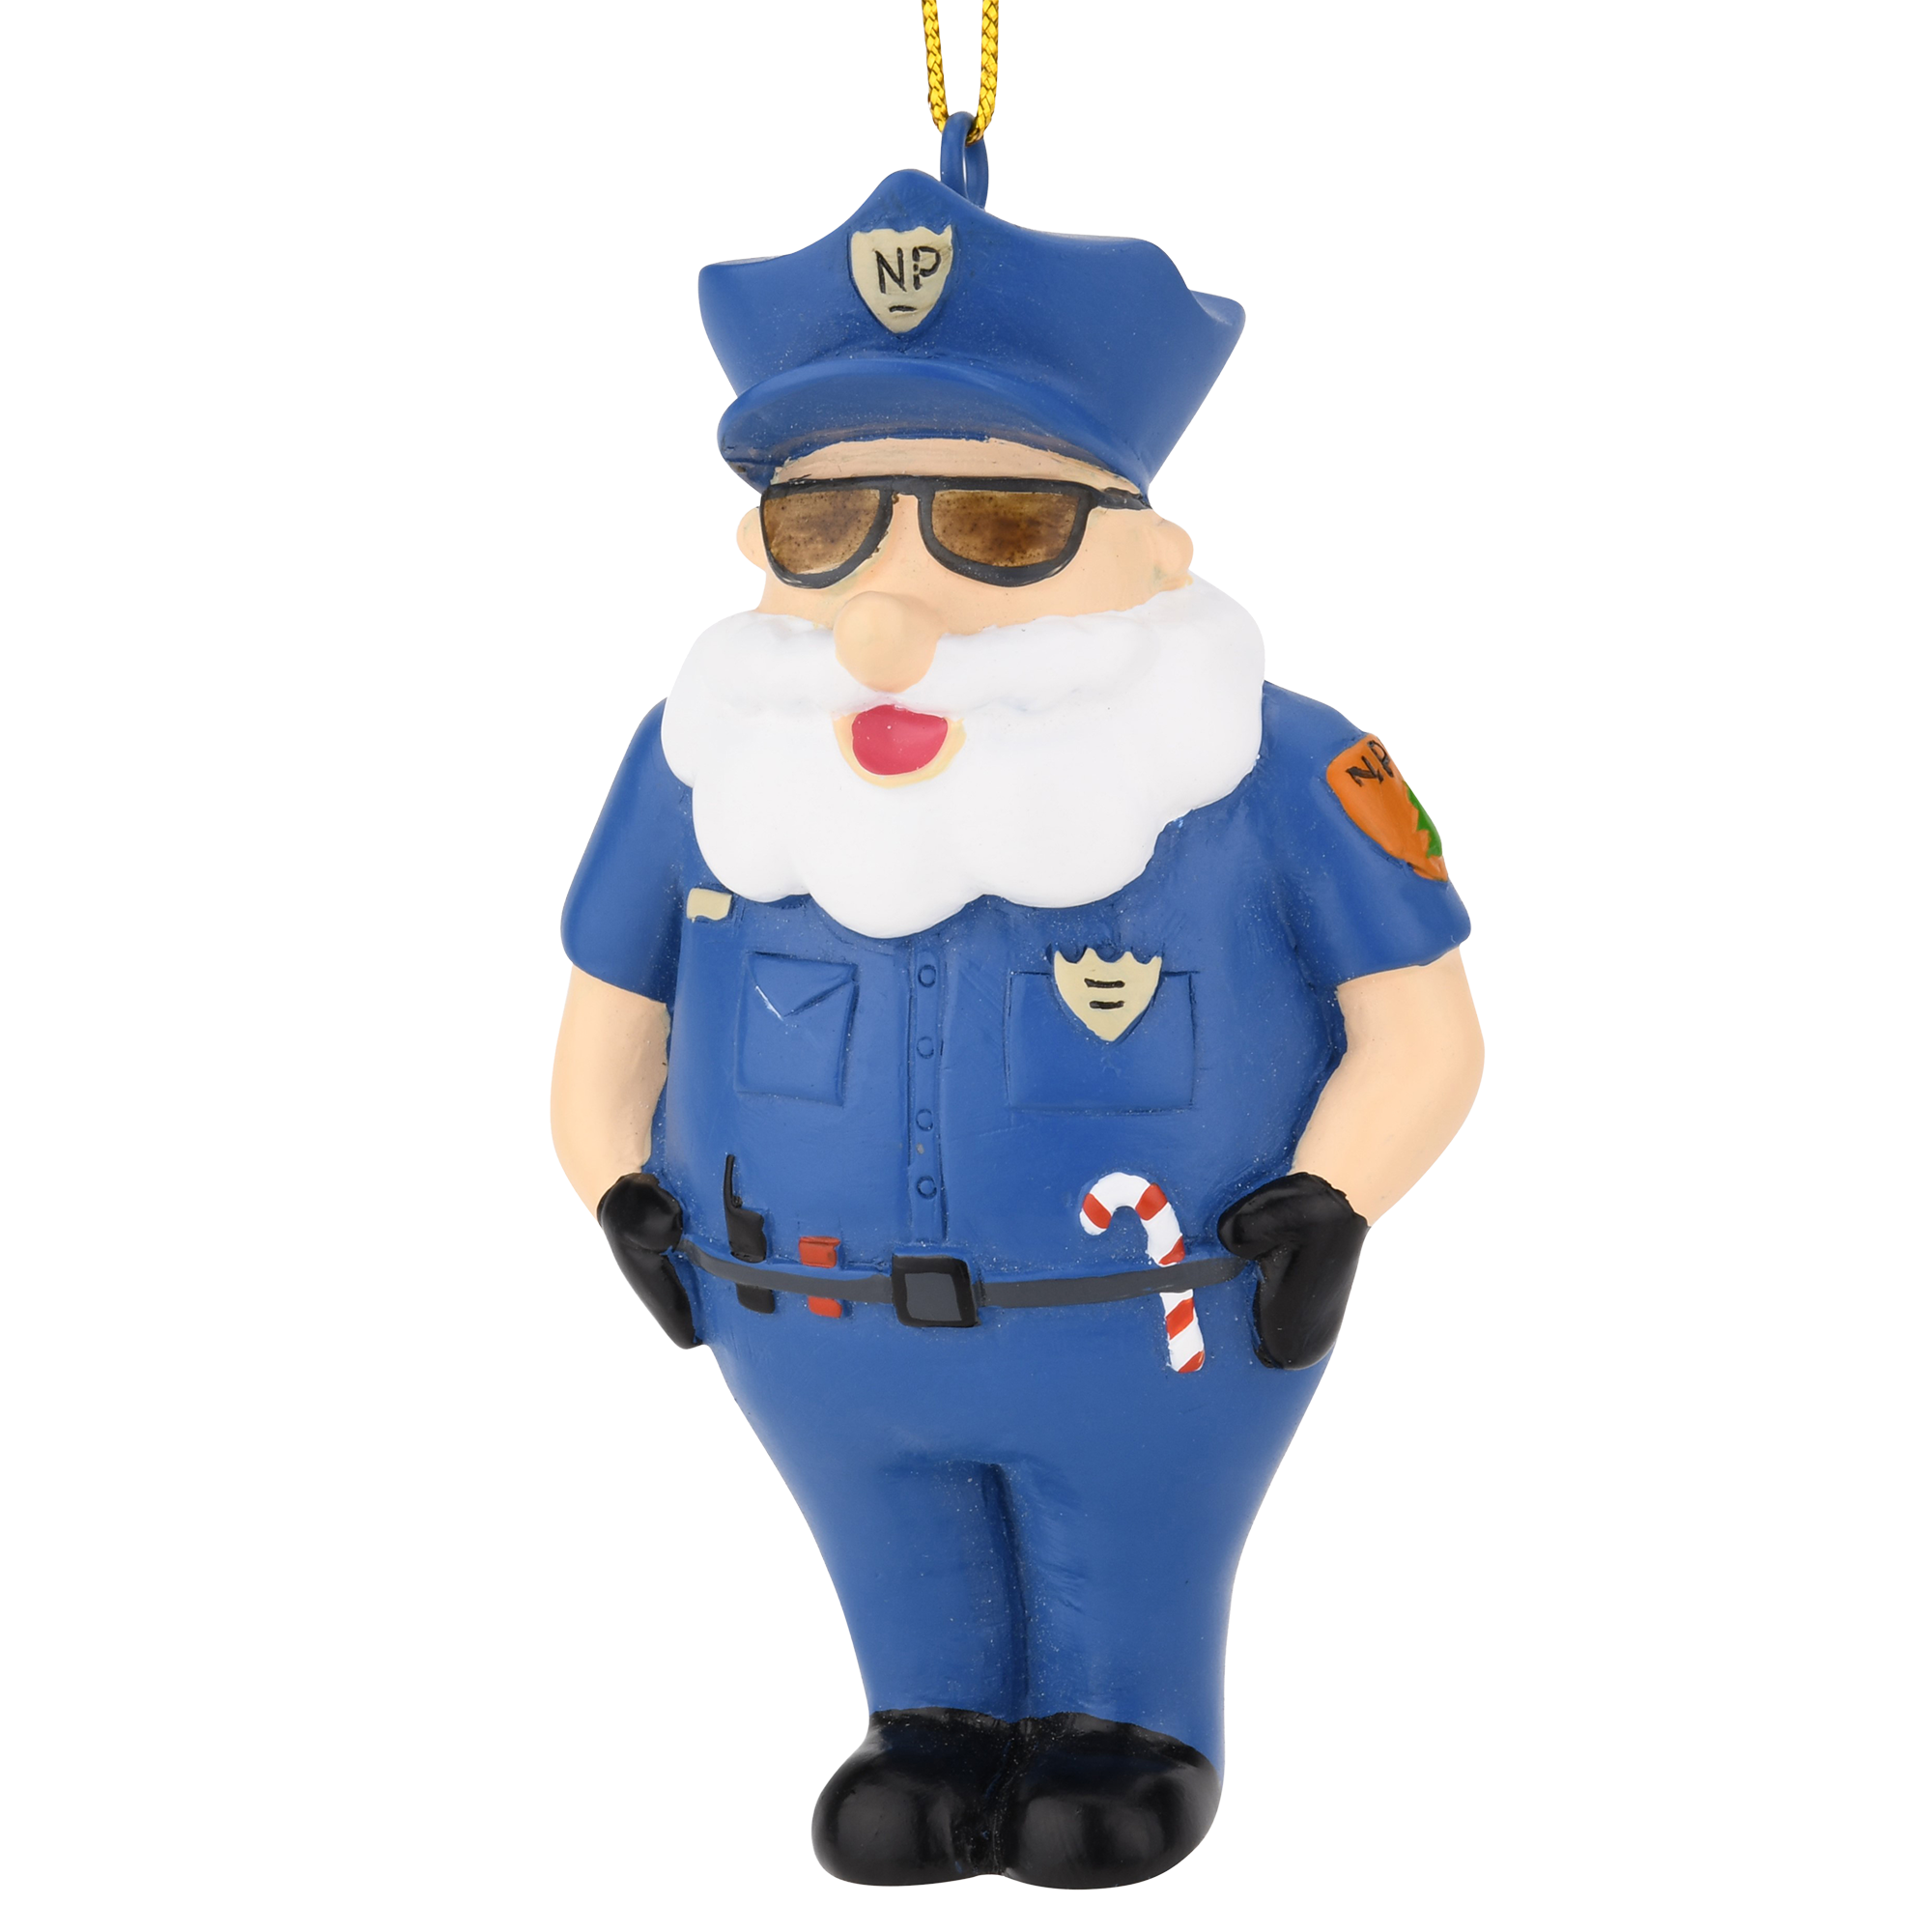 police officer ornament